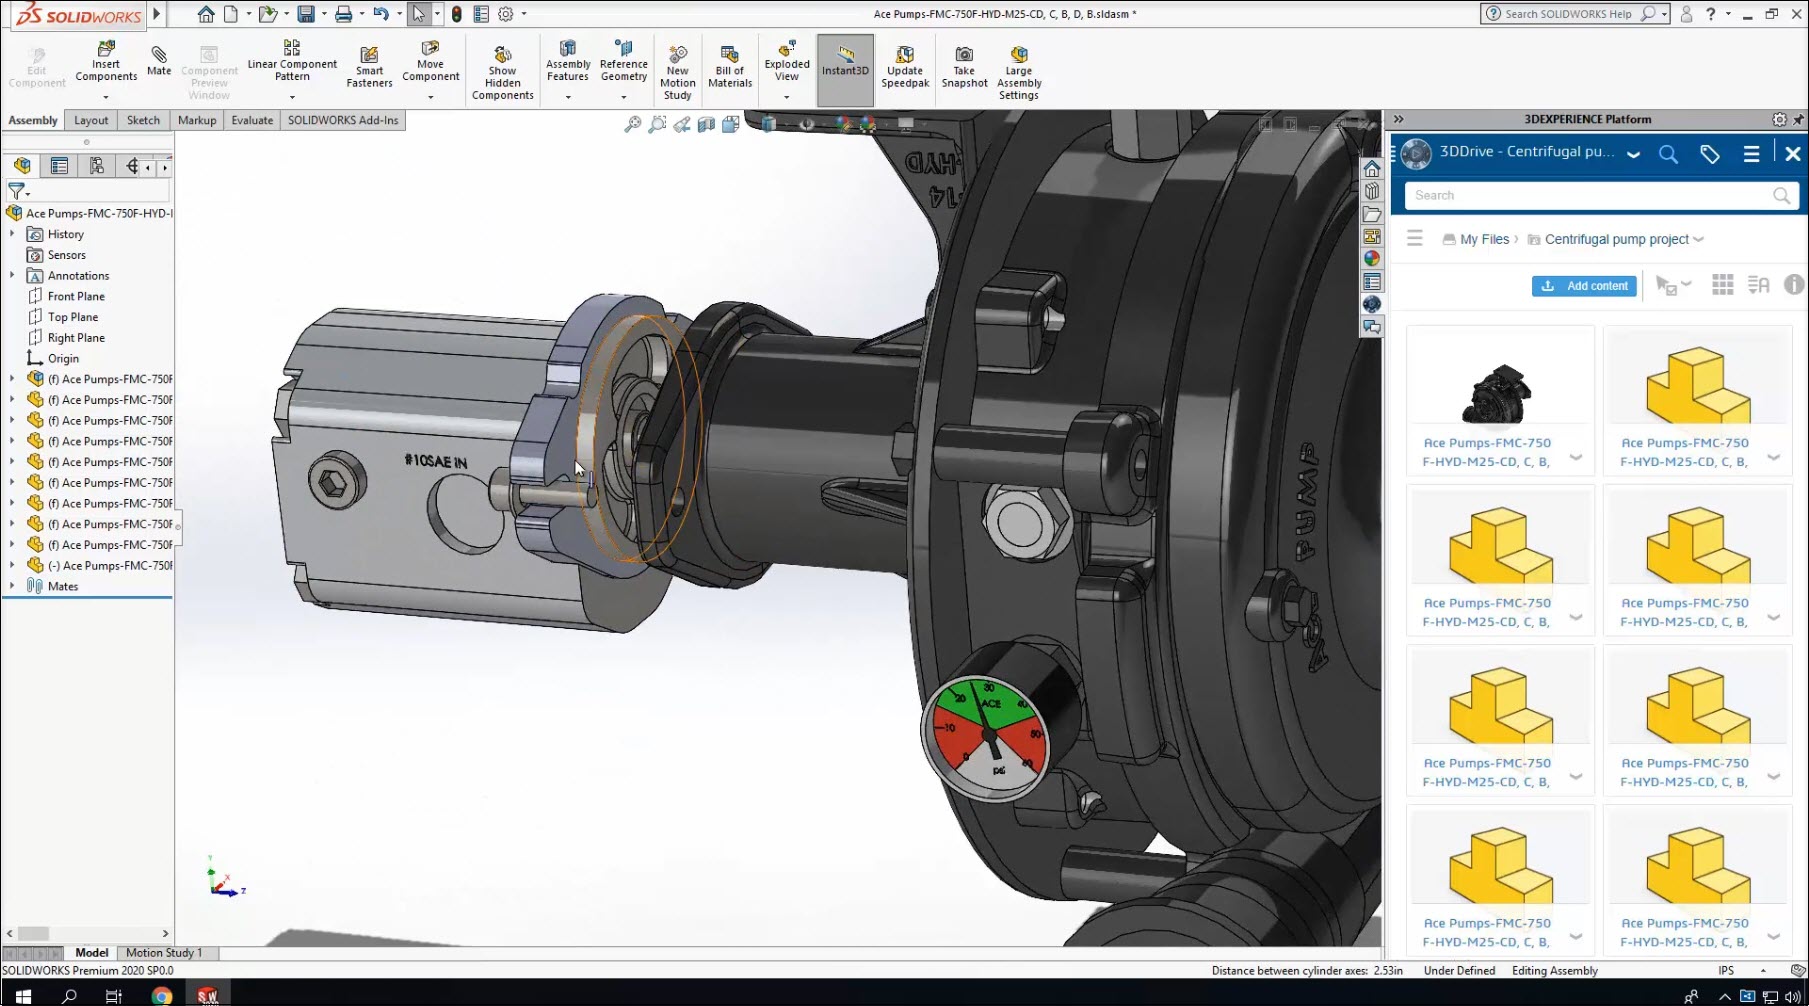 solidworks downloas